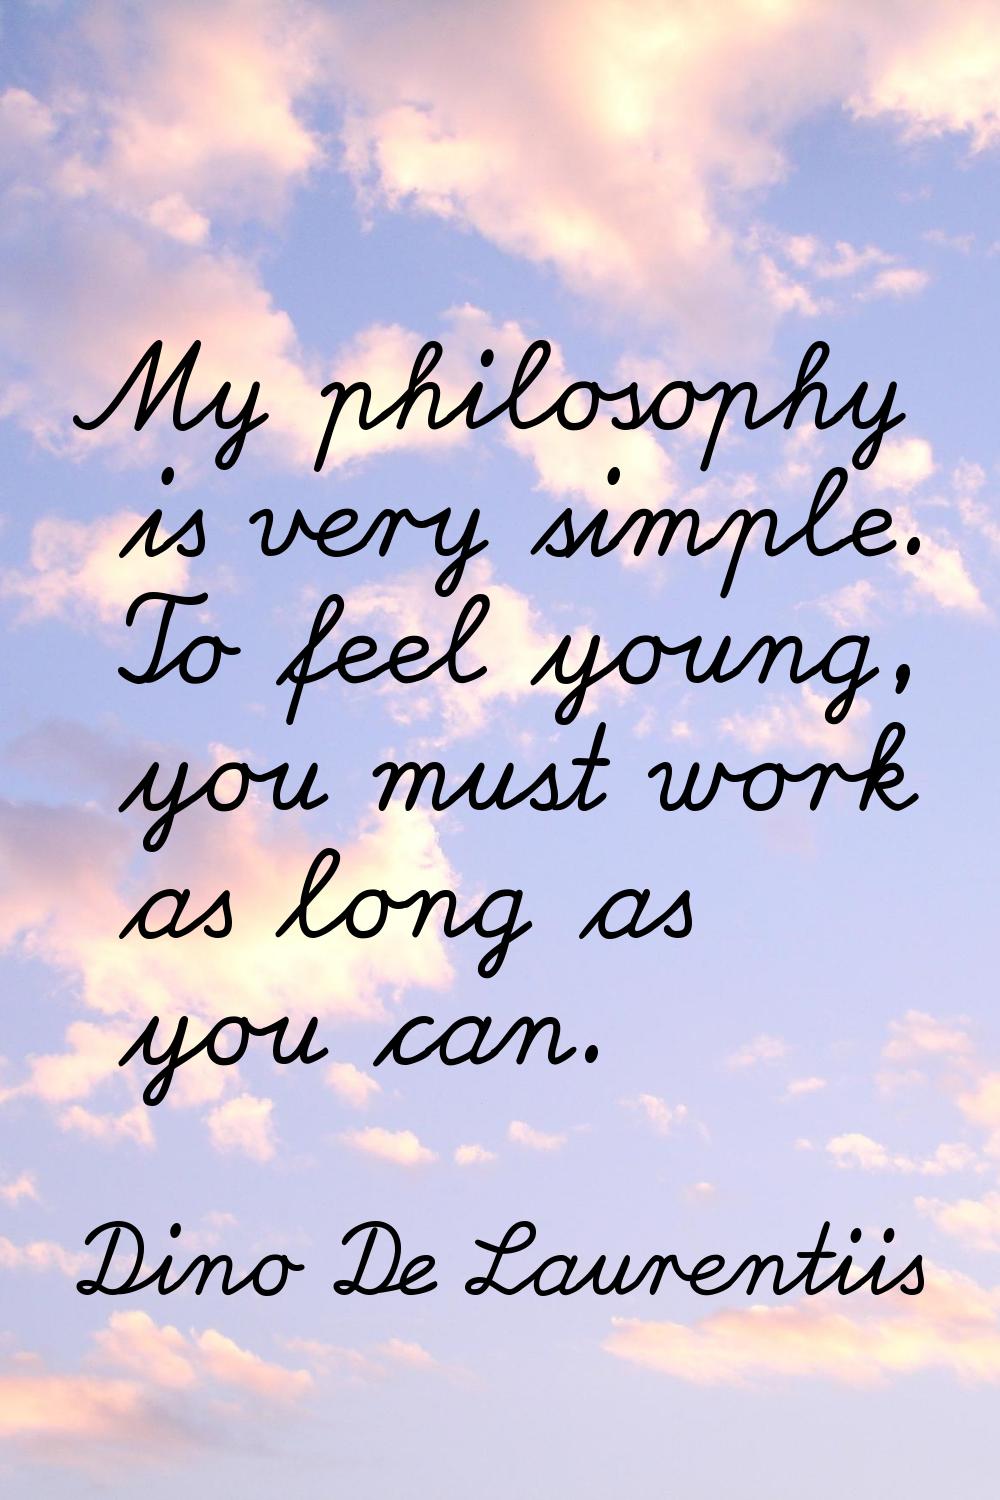 My philosophy is very simple. To feel young, you must work as long as you can.